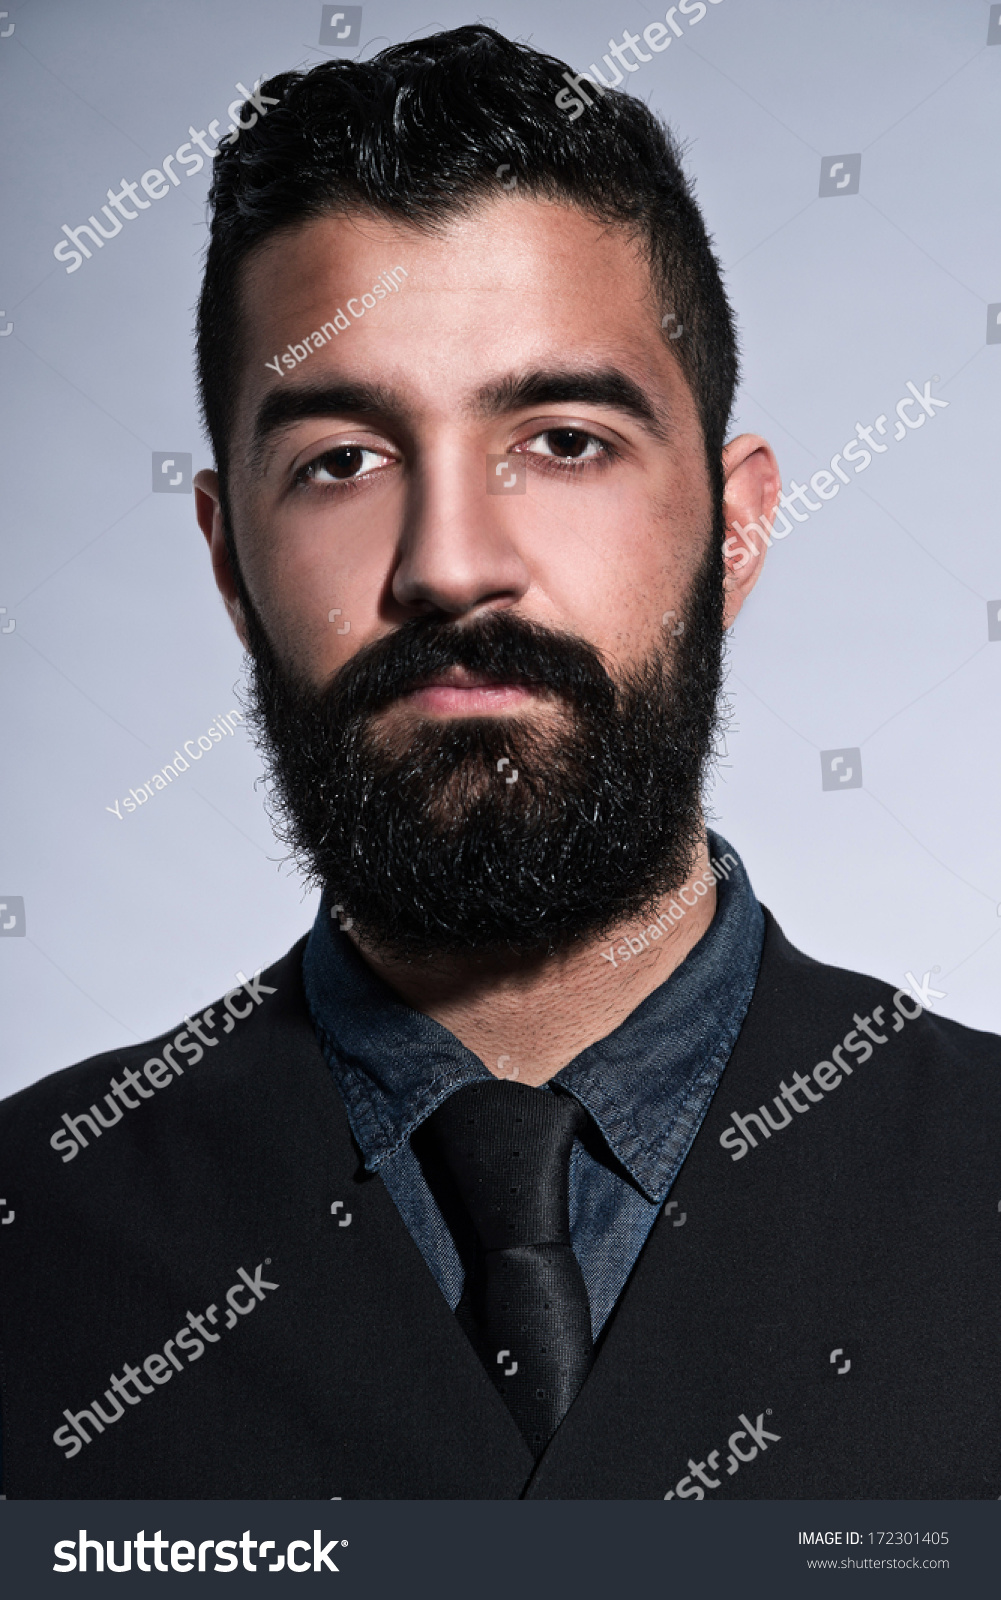 Retro Hipster 1900 Fashion Man In Suit With Black Hair And Beard ...